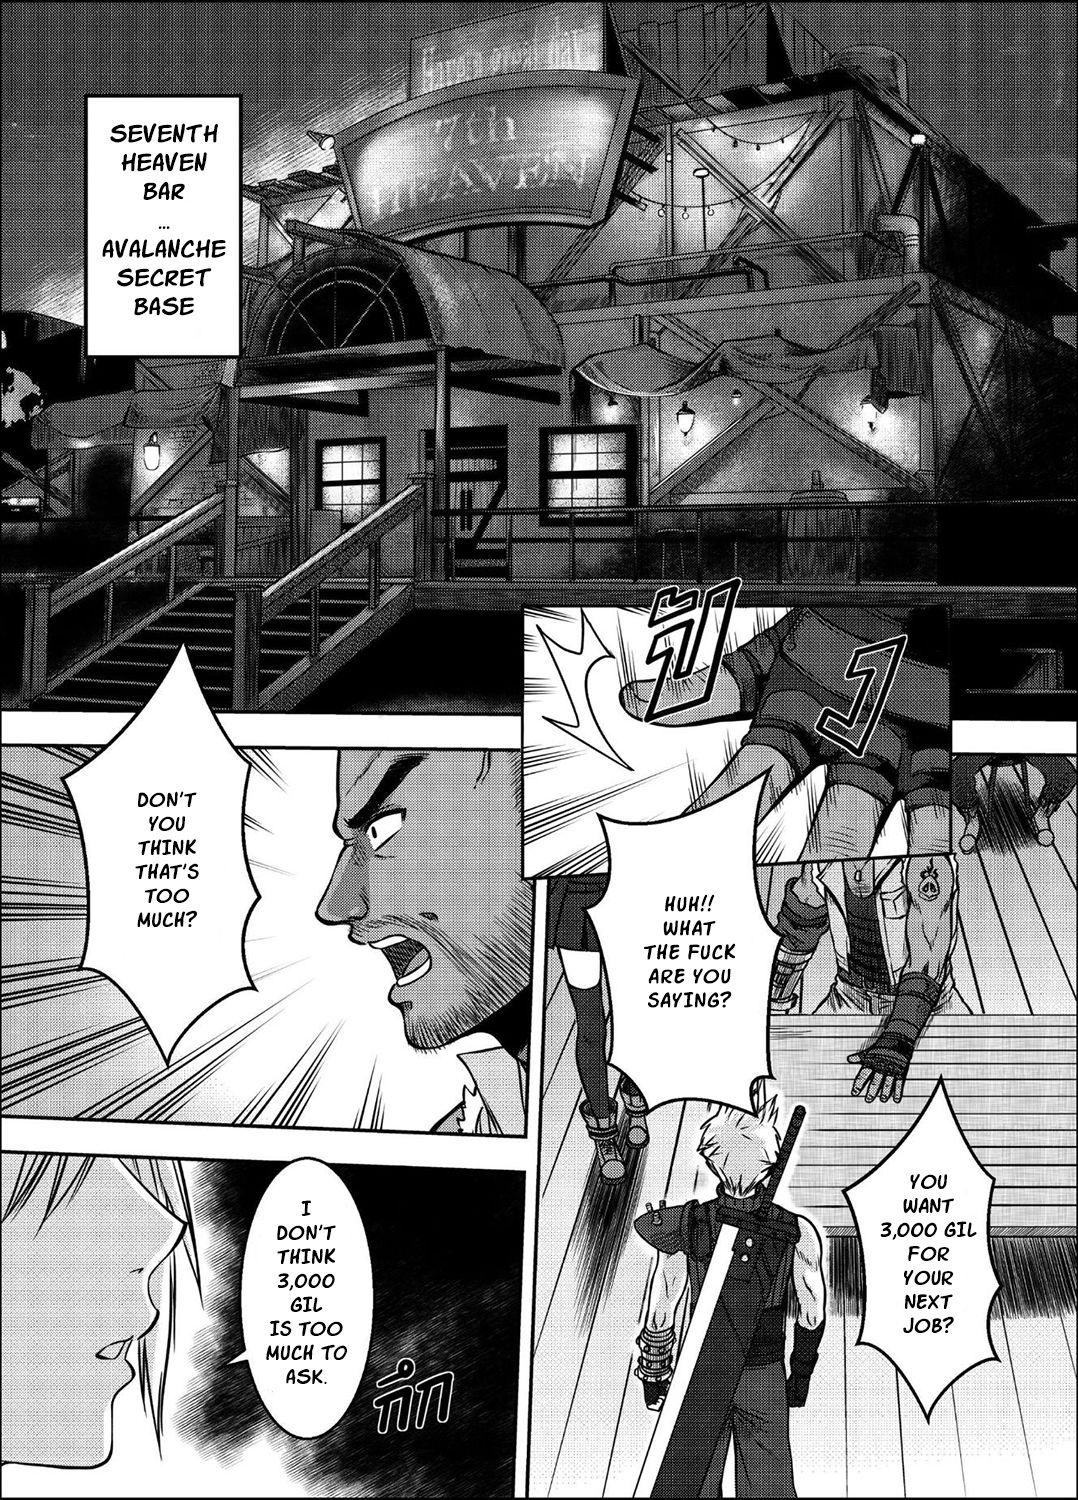 Romance [XTER] OUR [X] PROMISE (Final Fantasy VII) [English] [XNumbers] - Final fantasy vii Mofos - Page 2